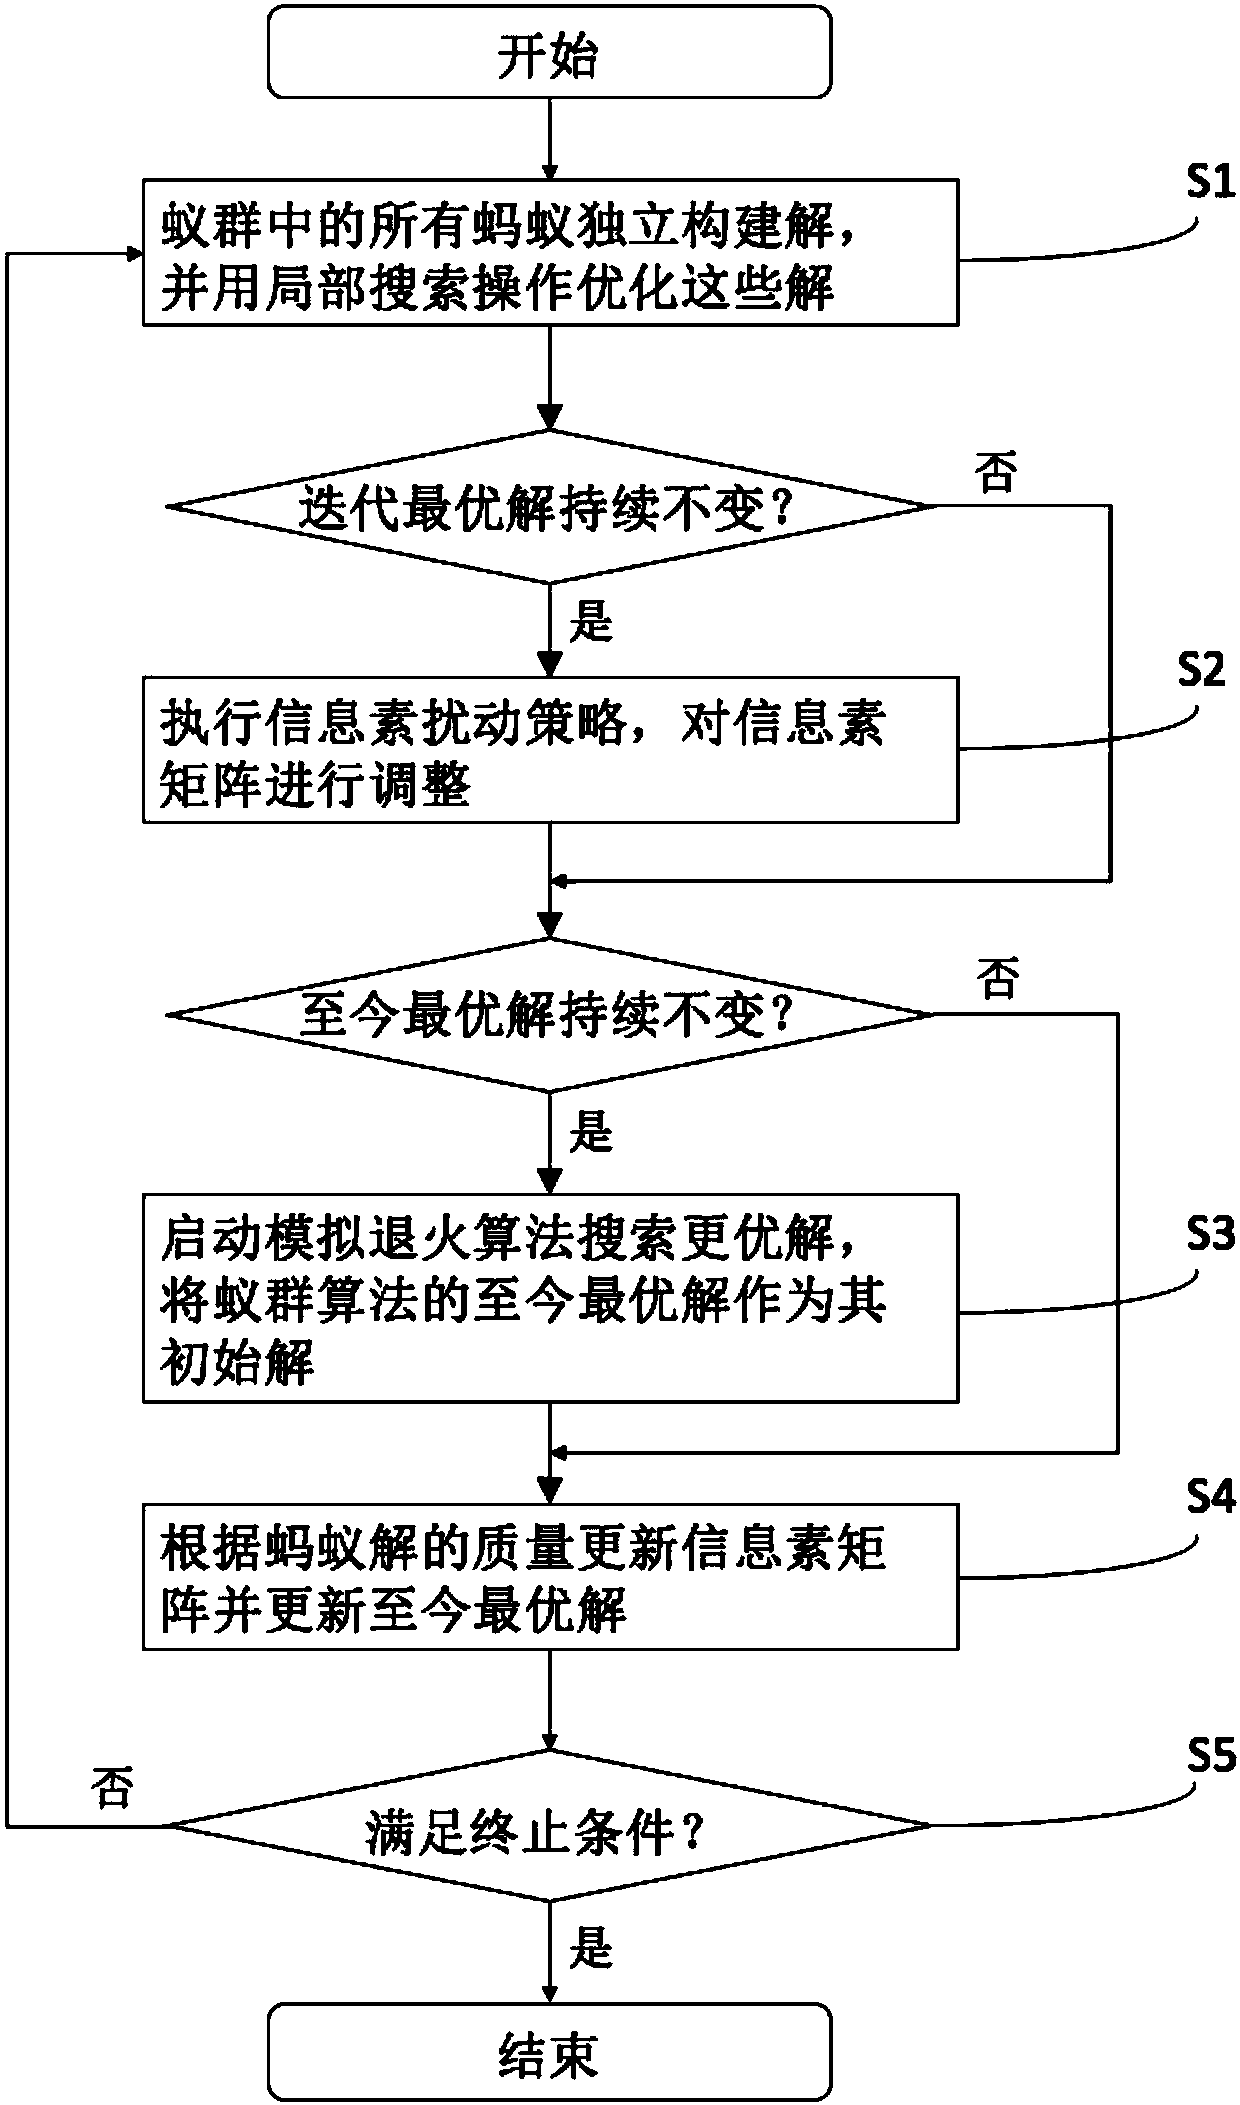 Hybrid ant colony algorithm for VRP problem and implementation system thereof